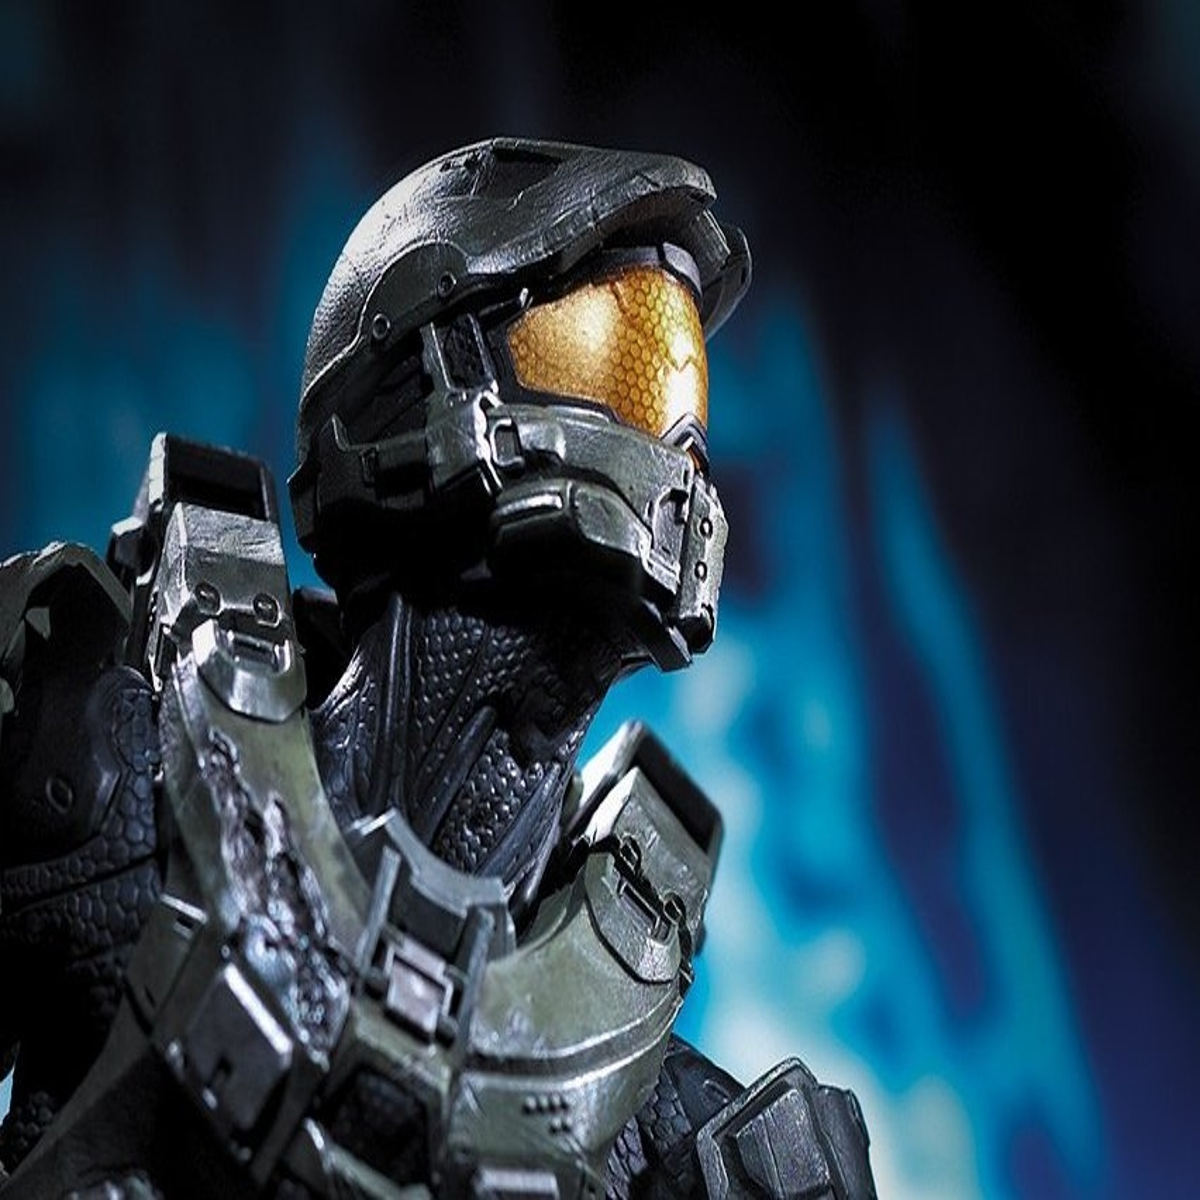 Halo: The Master Chief Collection Review: Remastered Chief